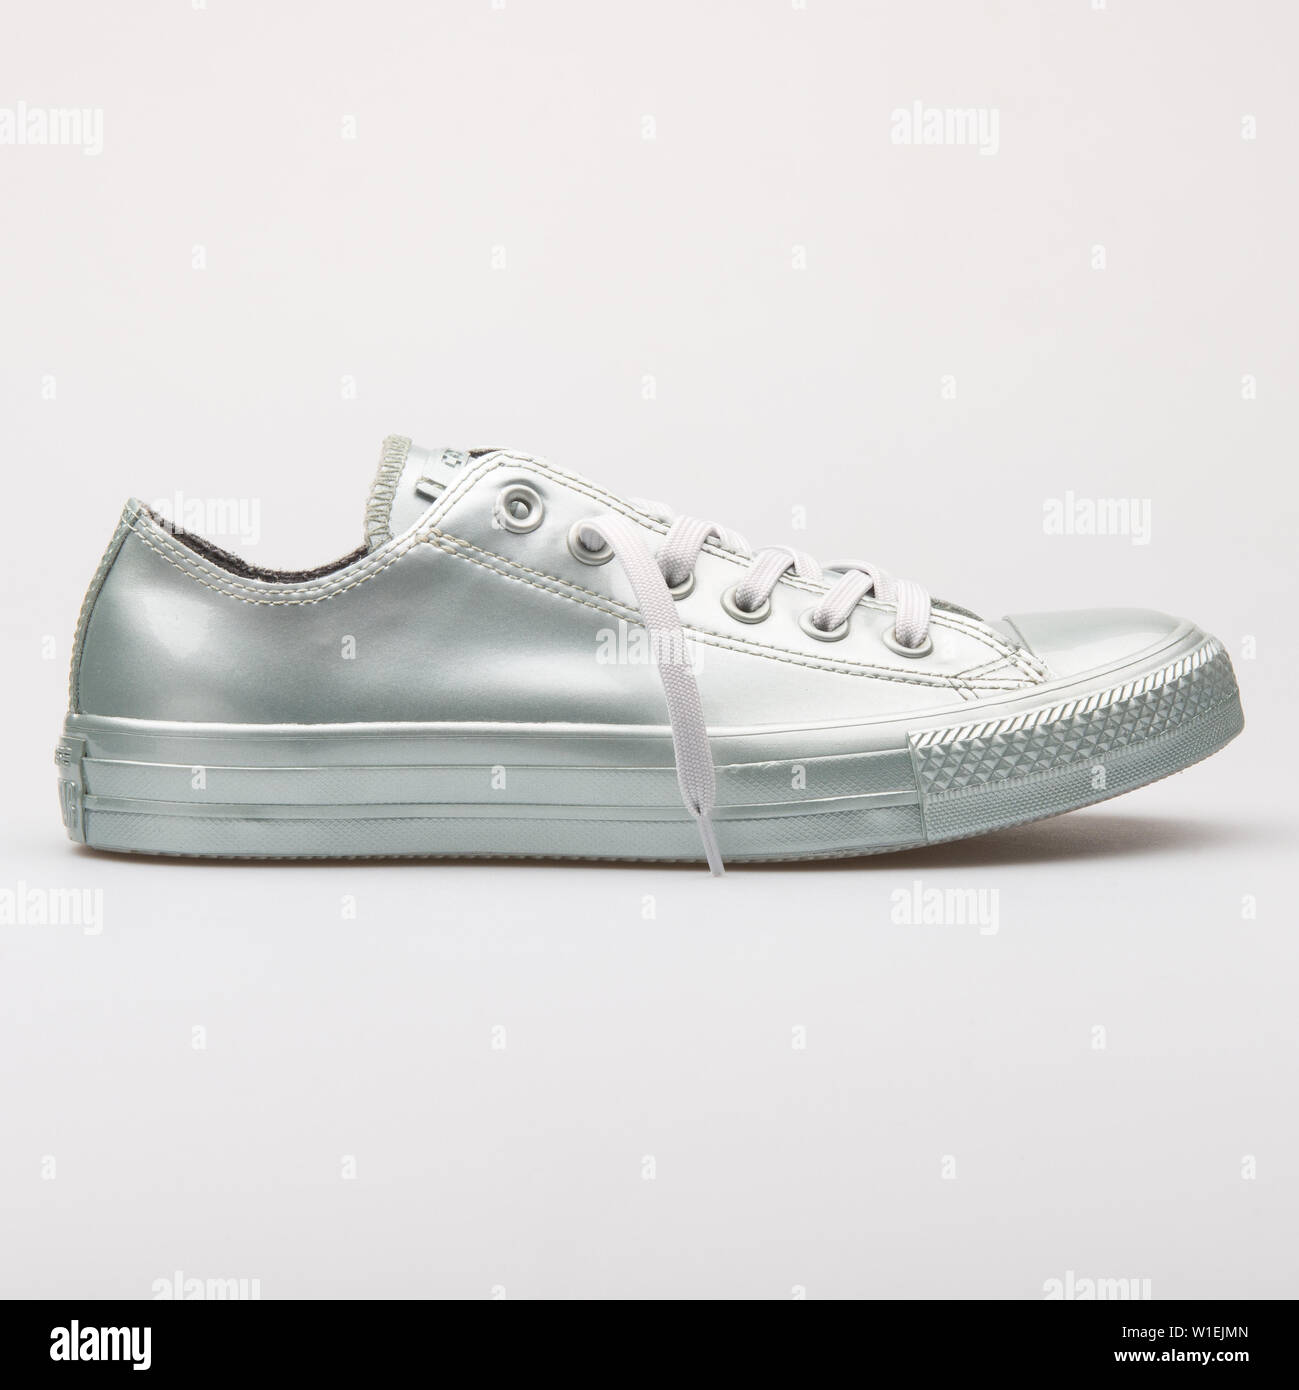 converse chuck taylor all star metallic rubber low top